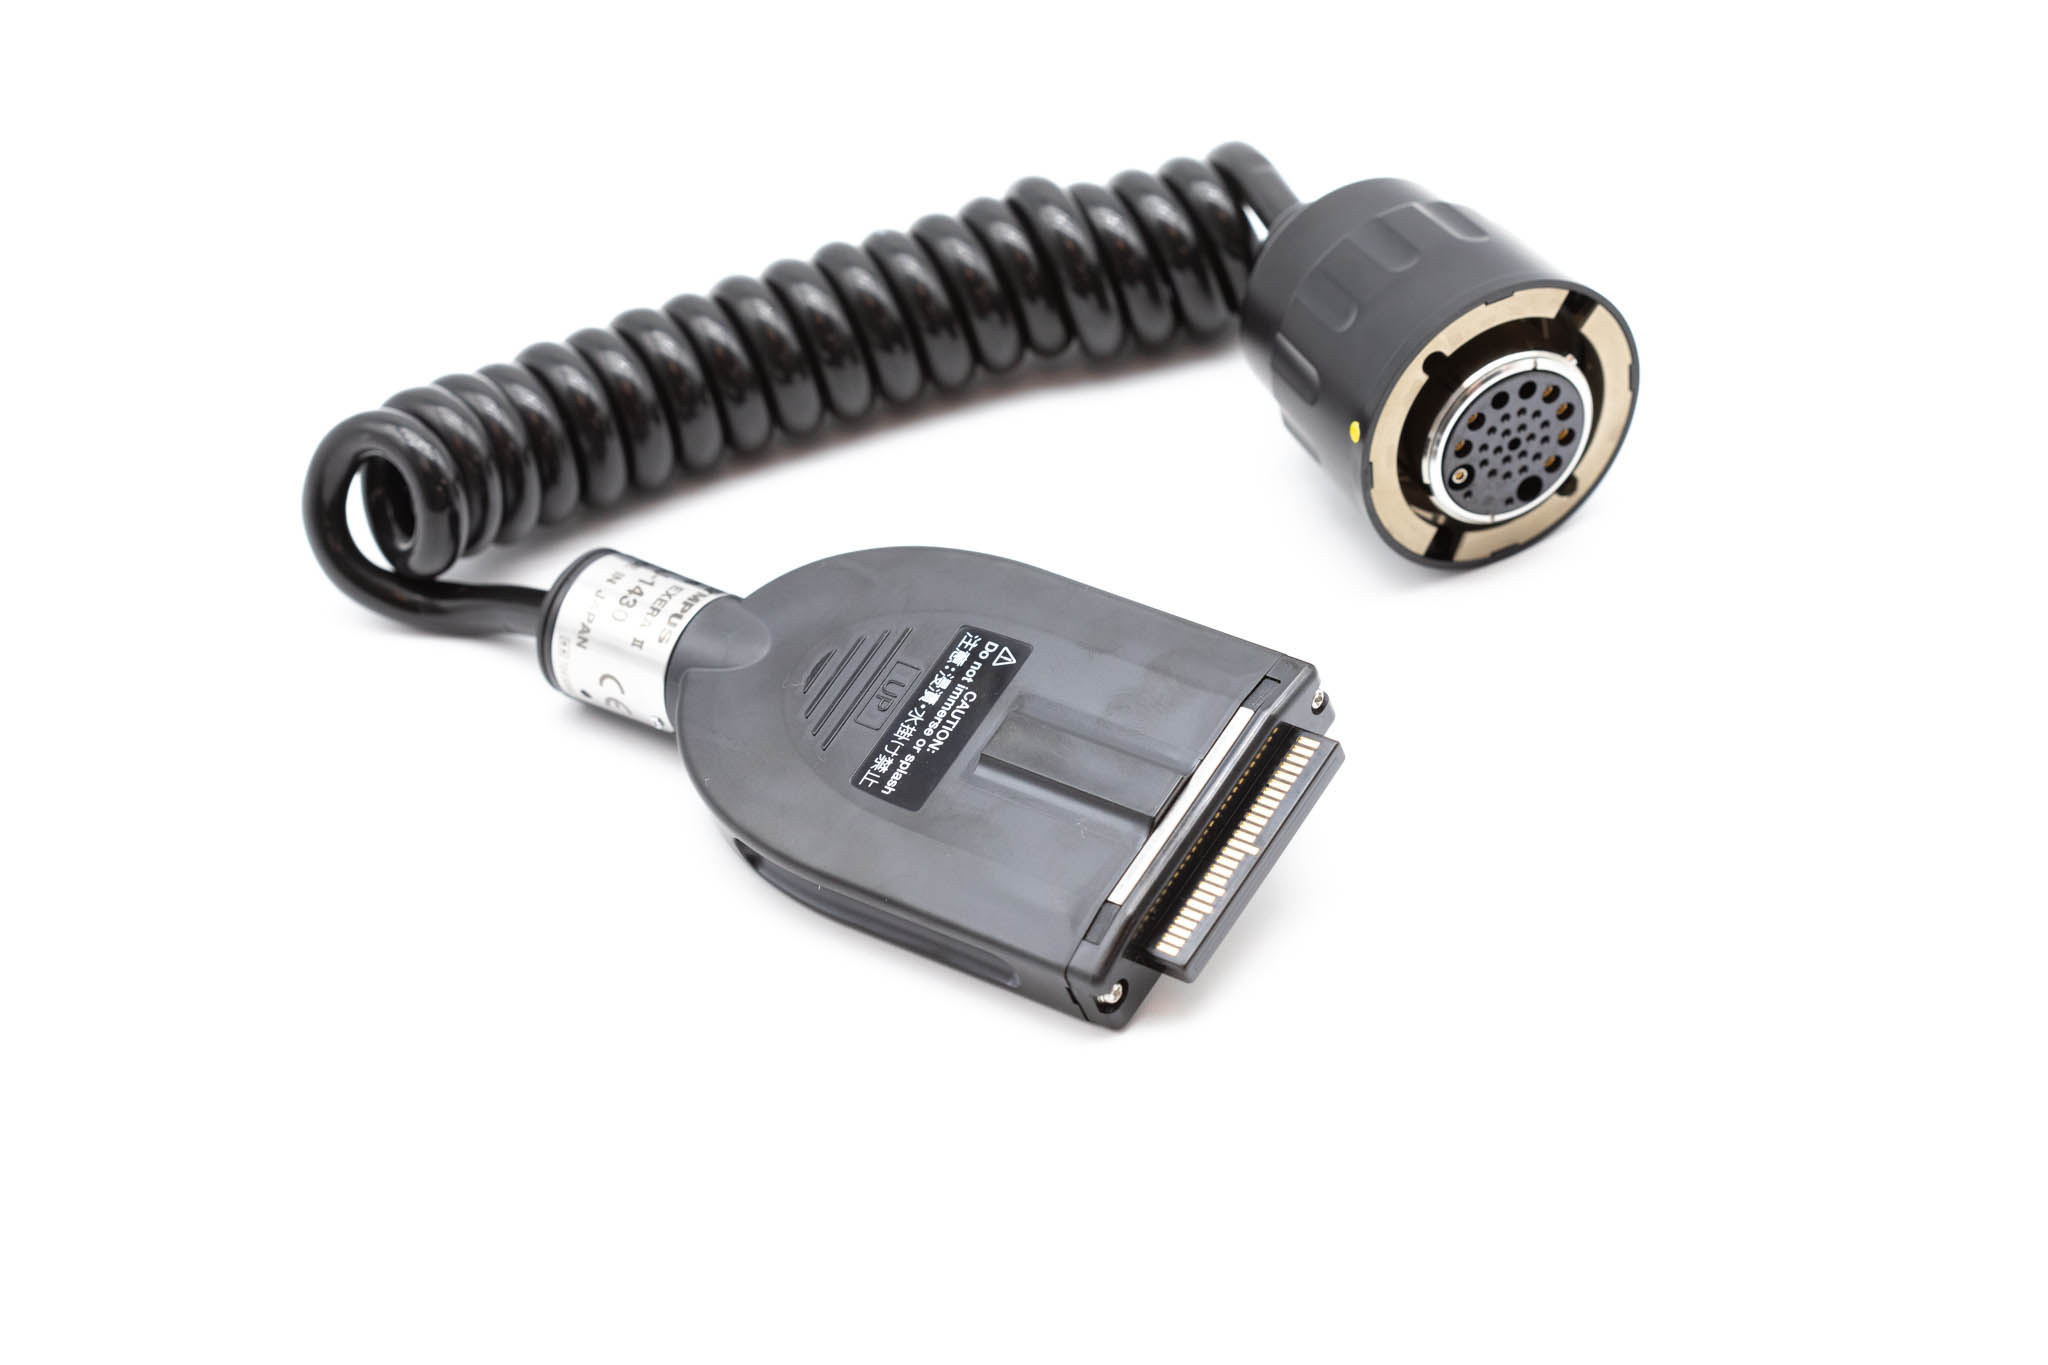 New! Olympus MAJ-1430 Video Cable (Pigtail) - for EVIS EXERA II Video Processor CV-180, CV-190